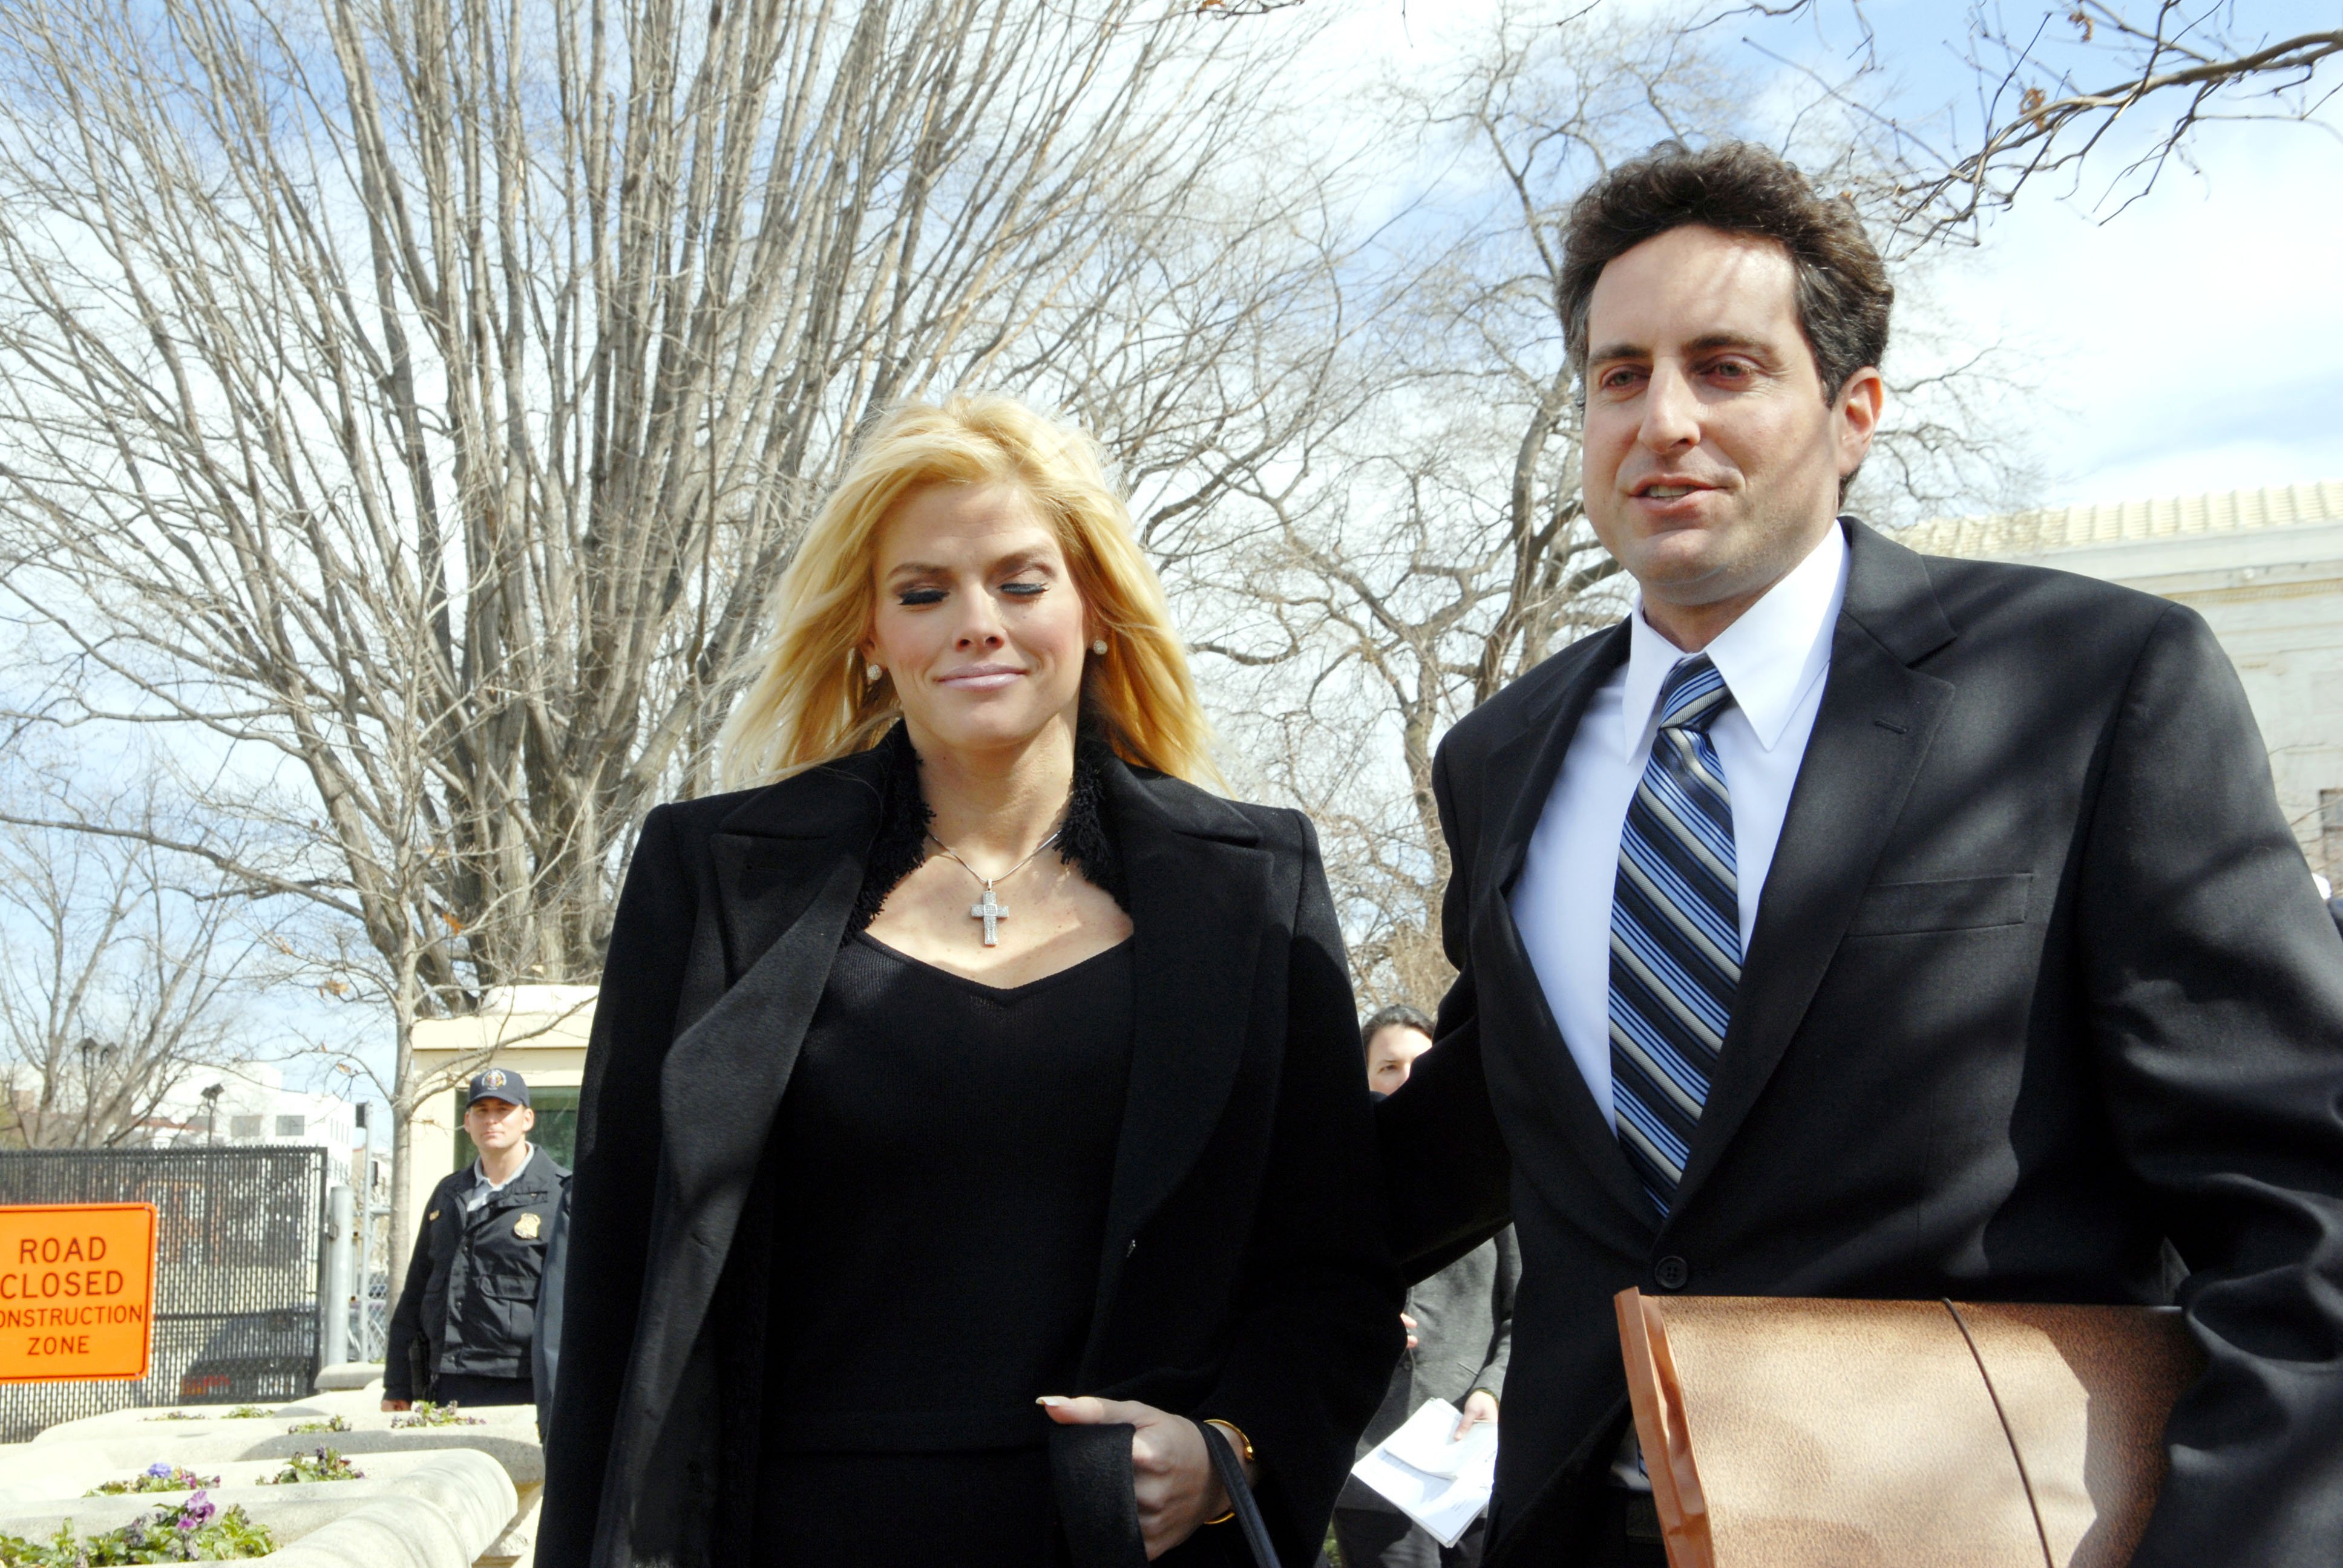 Actress Anna Nicole Smith and her attorney Howard K. Stern pictured leaving the US Supreme Court on February 28, 2006 in Washington, DC.┃Source: Getty Images